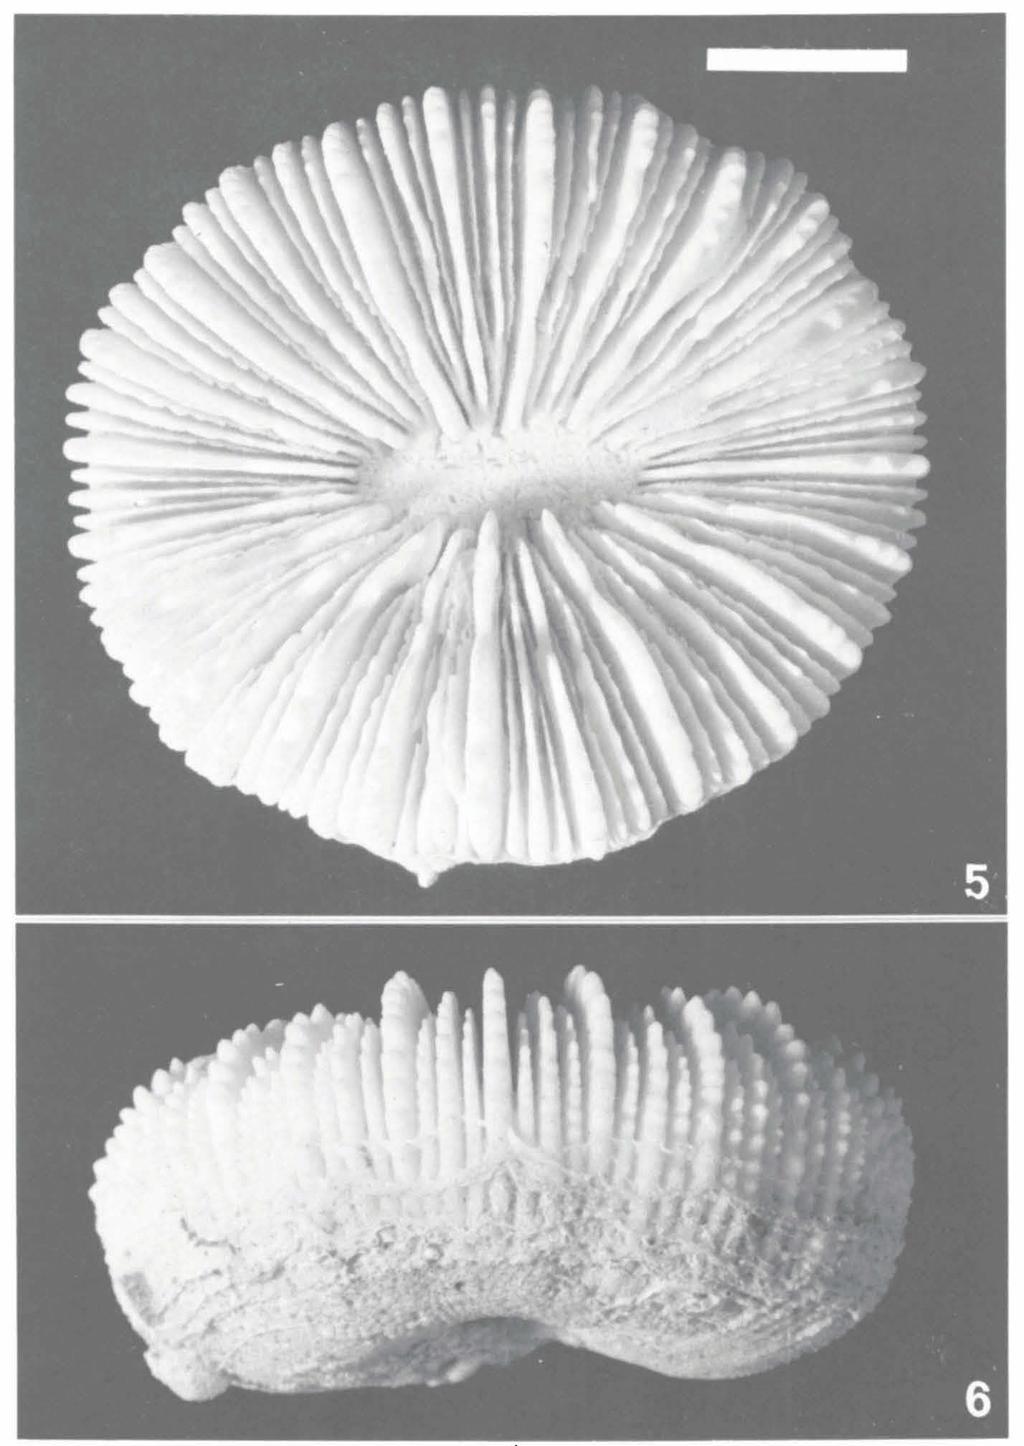 BEST/HOEKSEMA: OBSERVATIONS ON SCLERACTINIAN CORALS 395 Figs. 5-6.